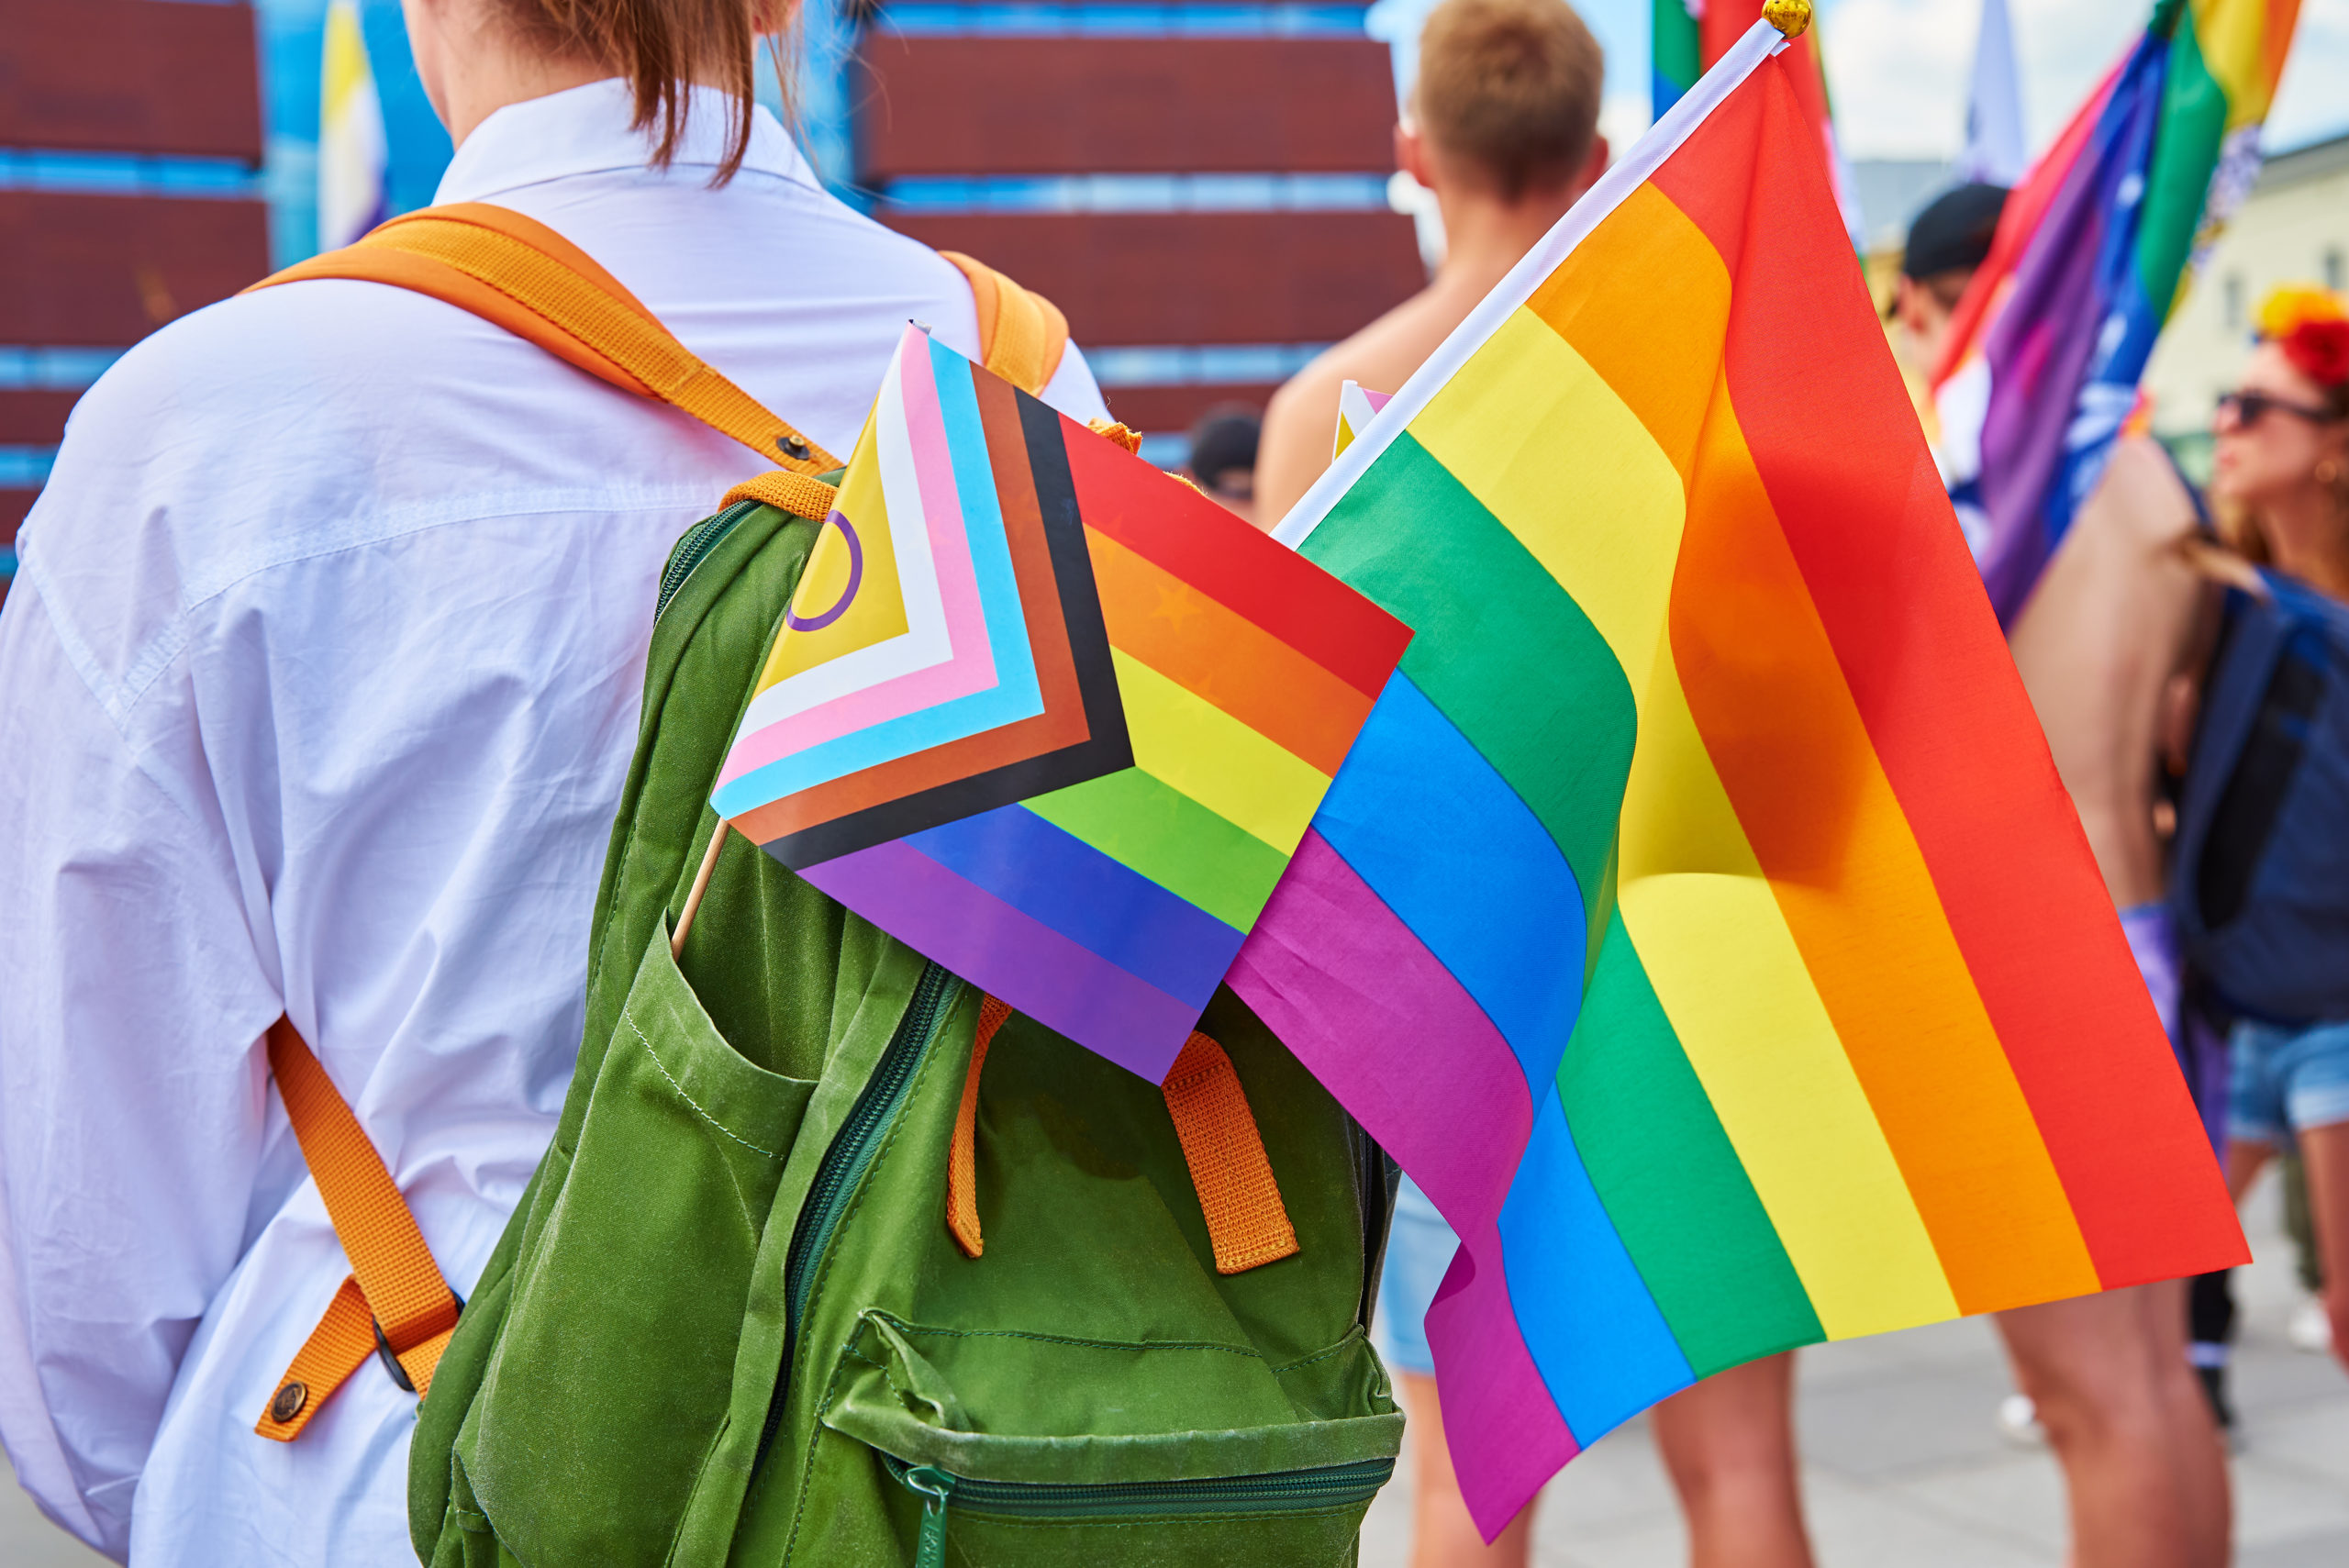 Connecticut’s Colleges and Universities Welcome back LGBTQ+ Students